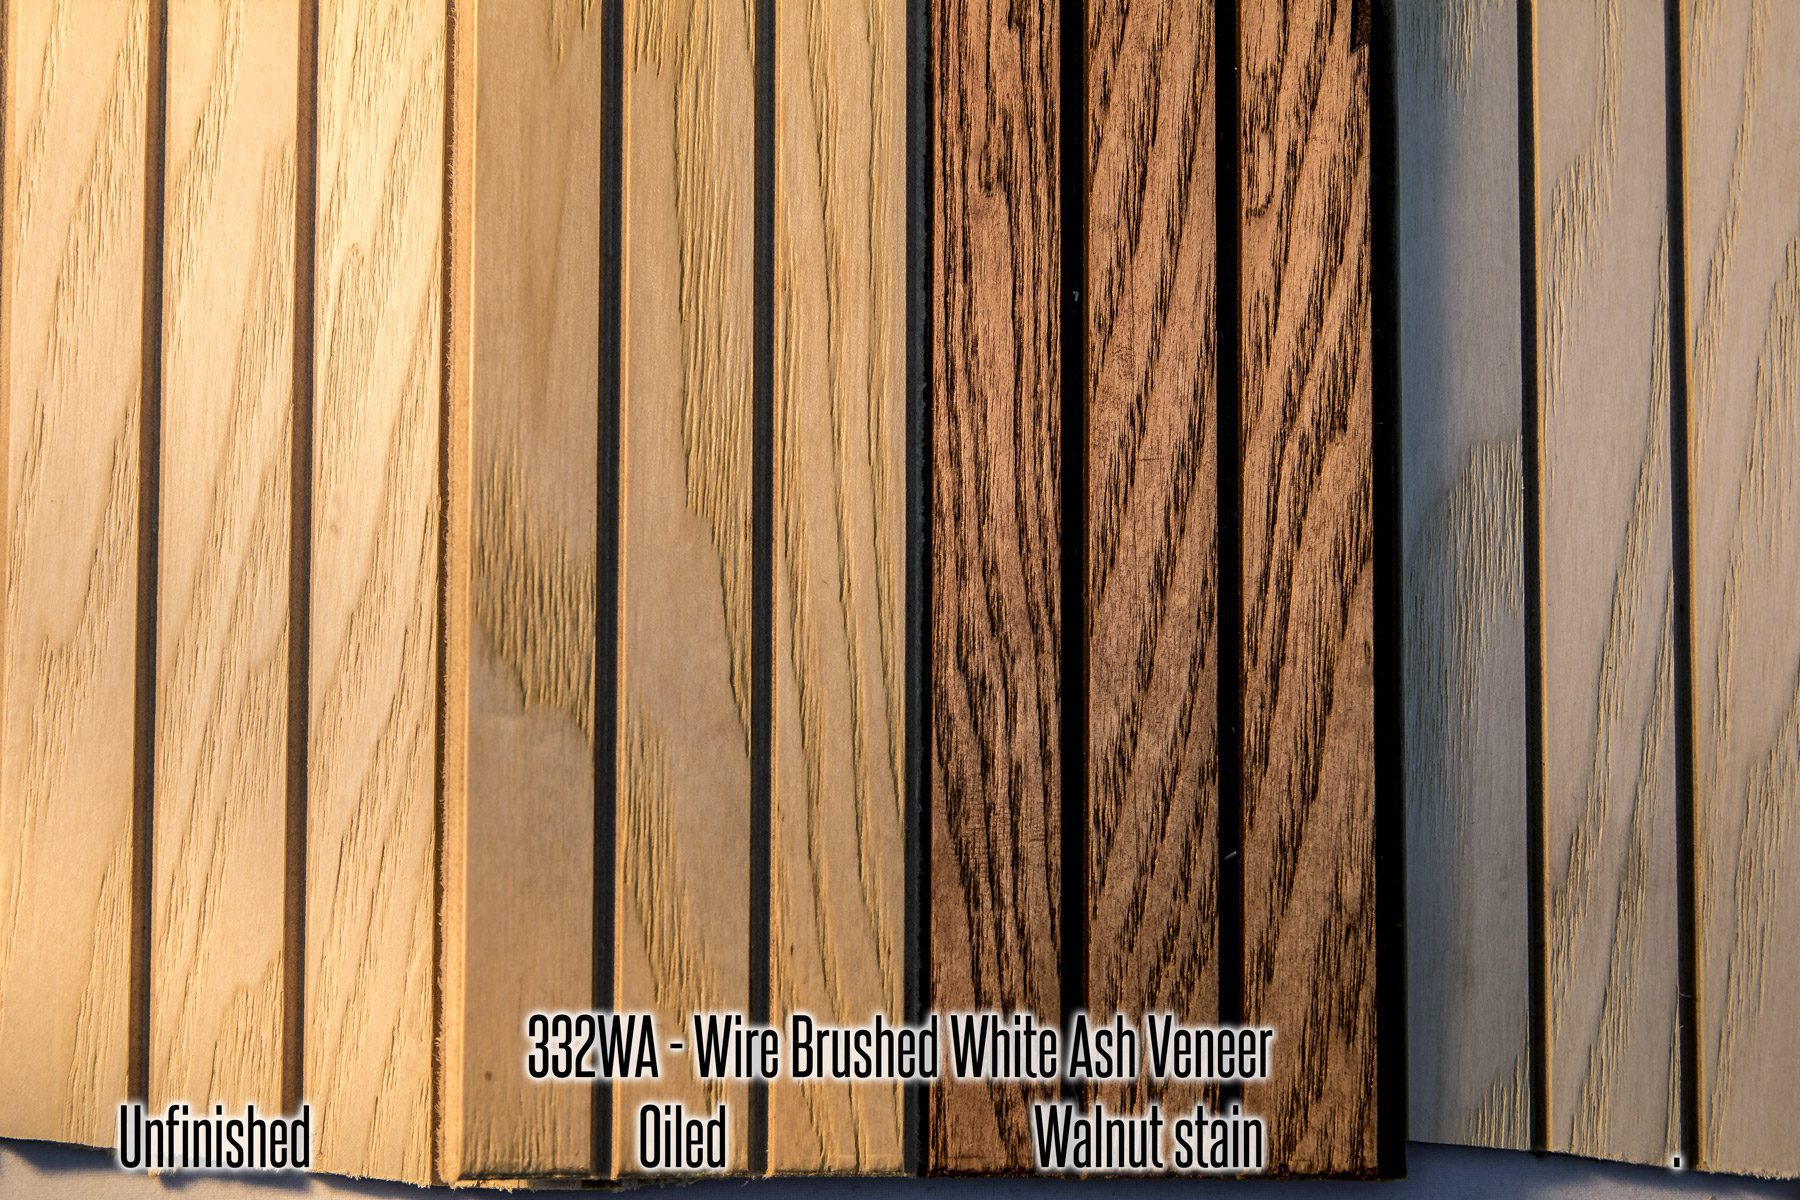 332 White Ash Wood Tambour Veneer Wall Panel 4x8 feet for walls, ceilings, wainscot, bar fronts, tambour cabinets, and more! Easily install in bars, restaurants, hotels, homes, condos, apartments, etc. Easily stain or clear coat!